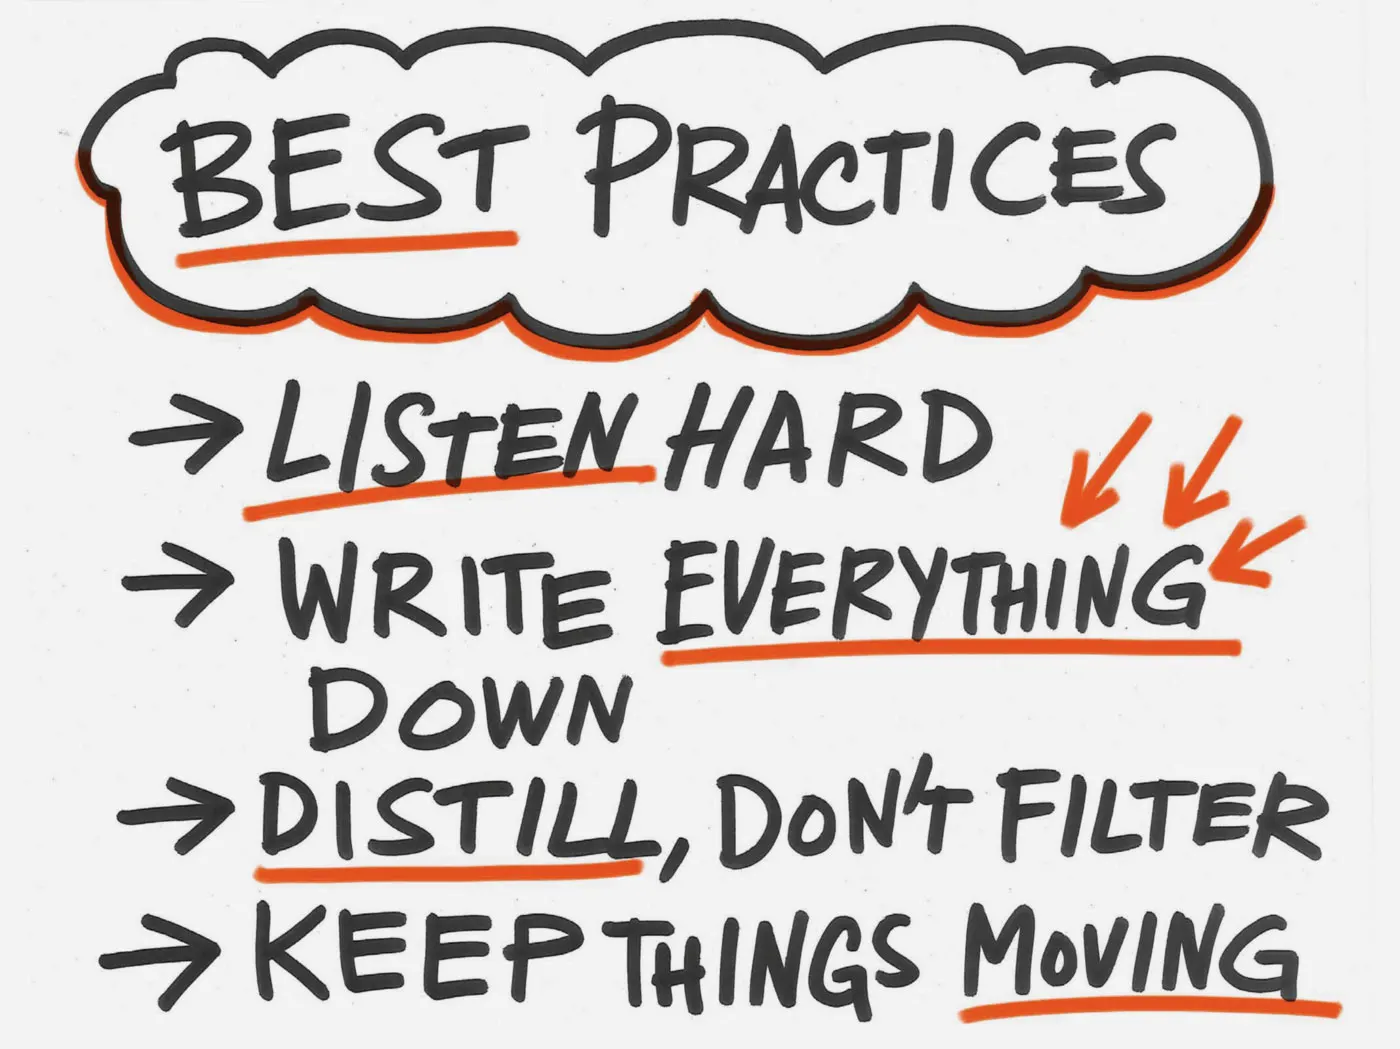 Black marker sketch with the heading "Best Practices" and underneath it Listen hard. Write everything down. Distill, don't filter. Keep things moving.